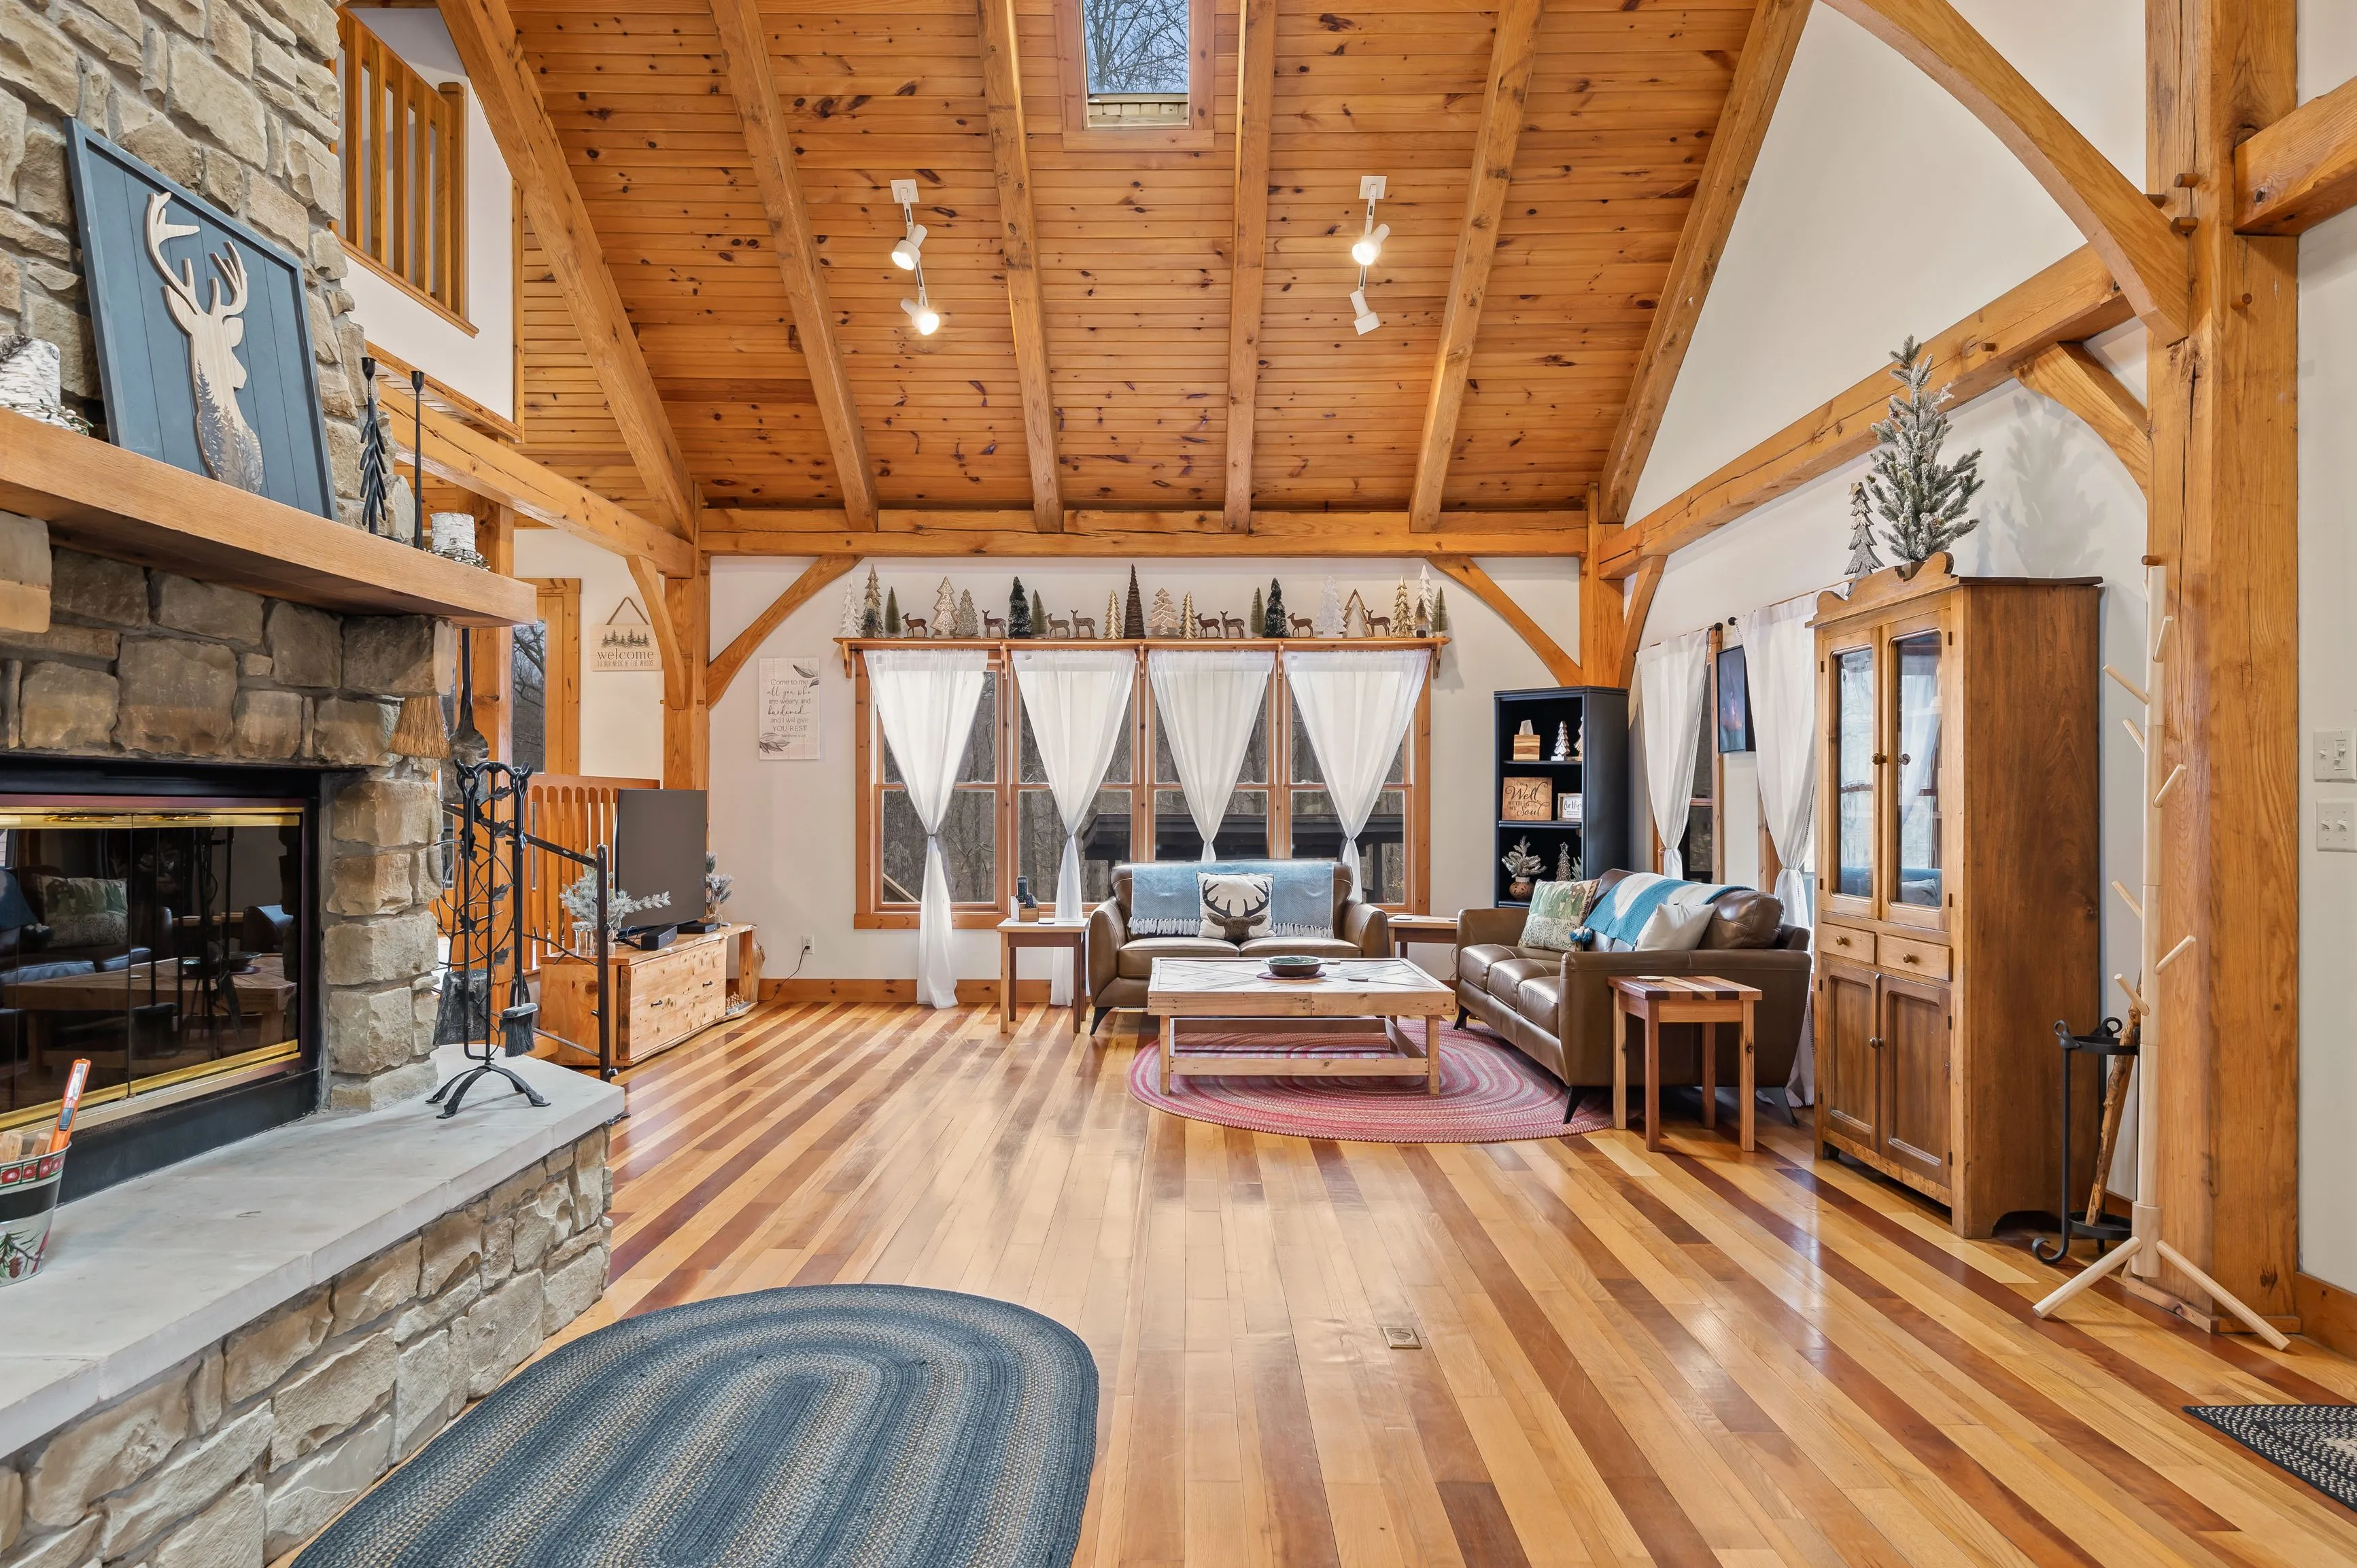 Spacious living room interior with high wooden ceilings, exposed beams, hardwood floors, stone fireplace, and large windows draped with sheer curtains in a rustic cabin style home.